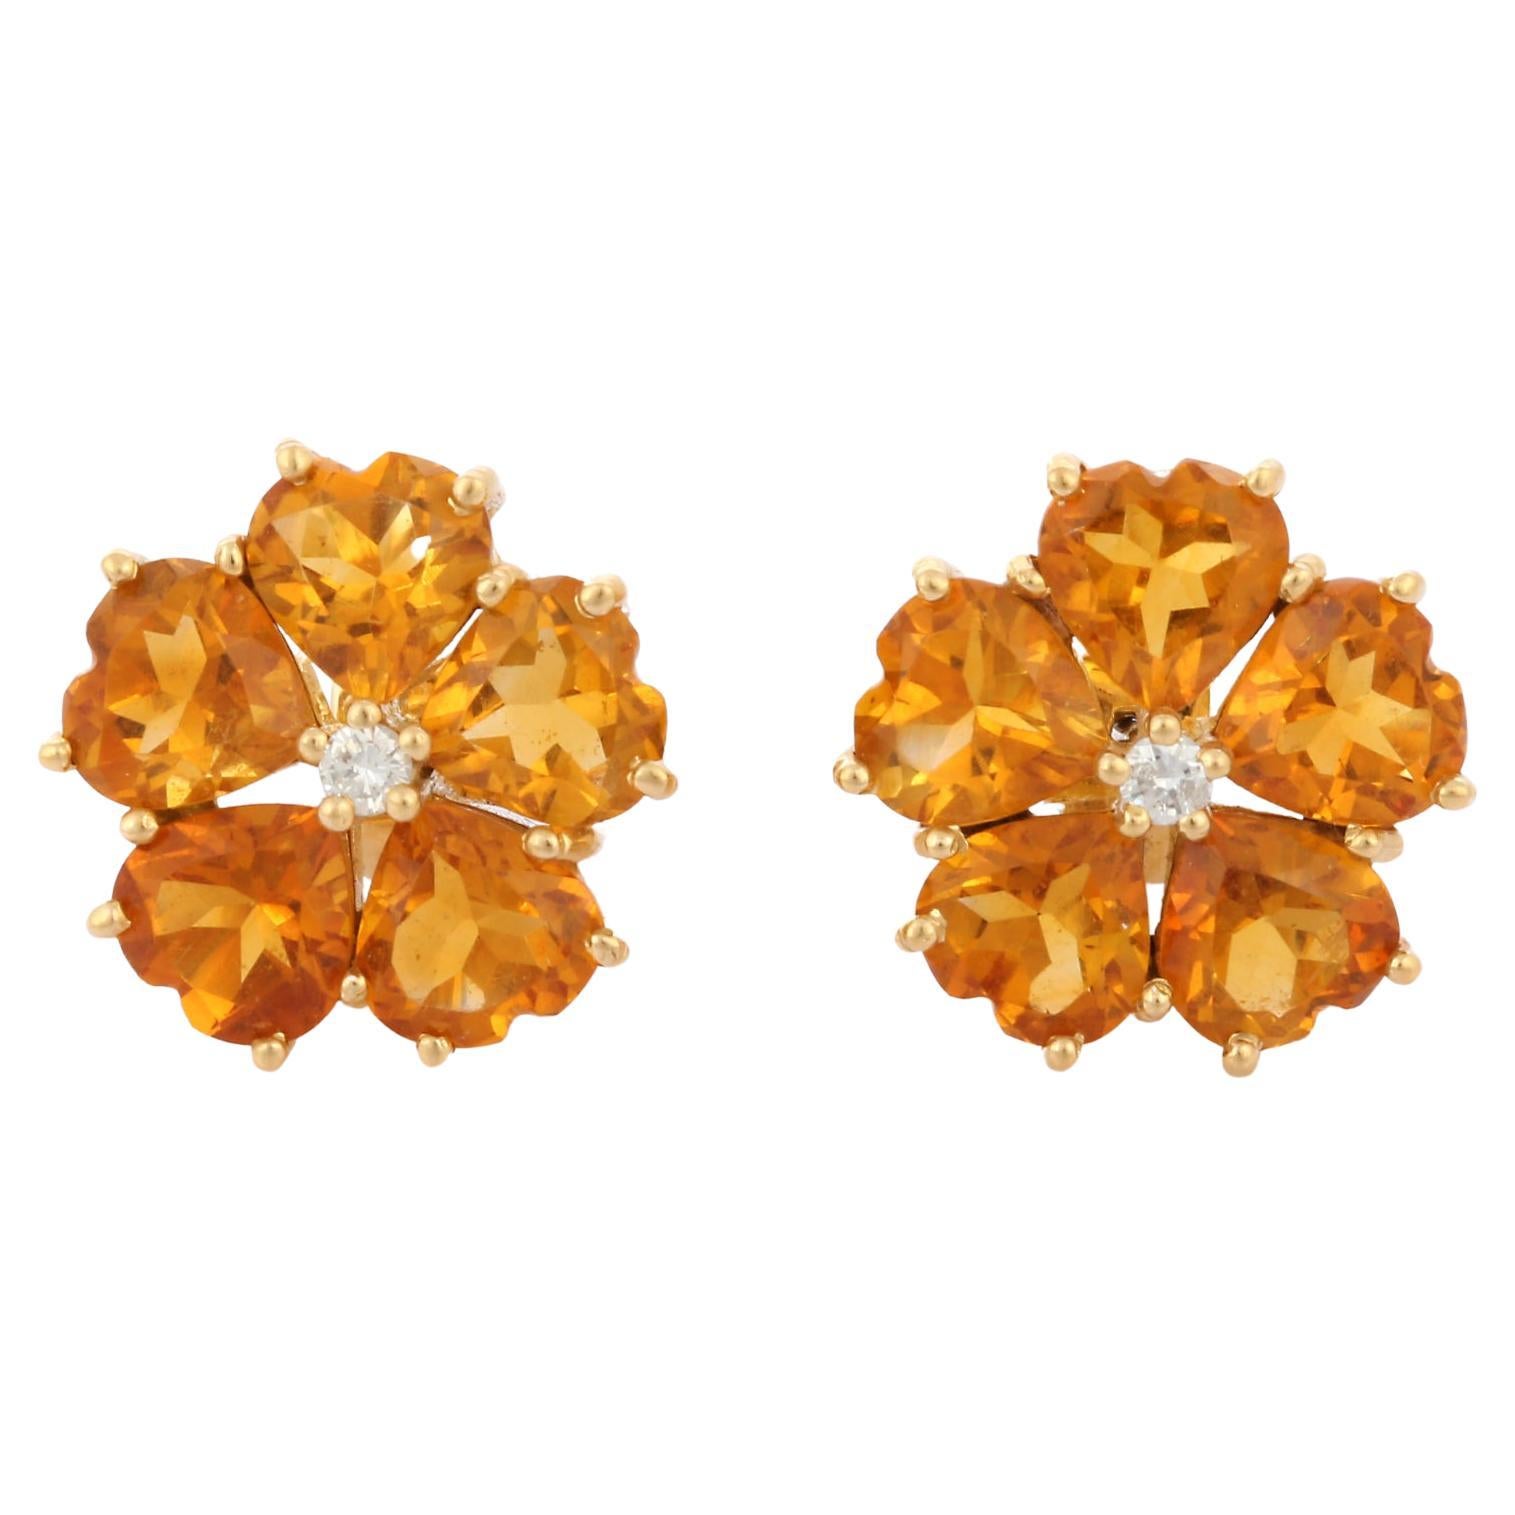 Heart Cut 6.5 ct Citrine Floral Stud Earrings with Diamonds in 18K Yellow Gold For Sale